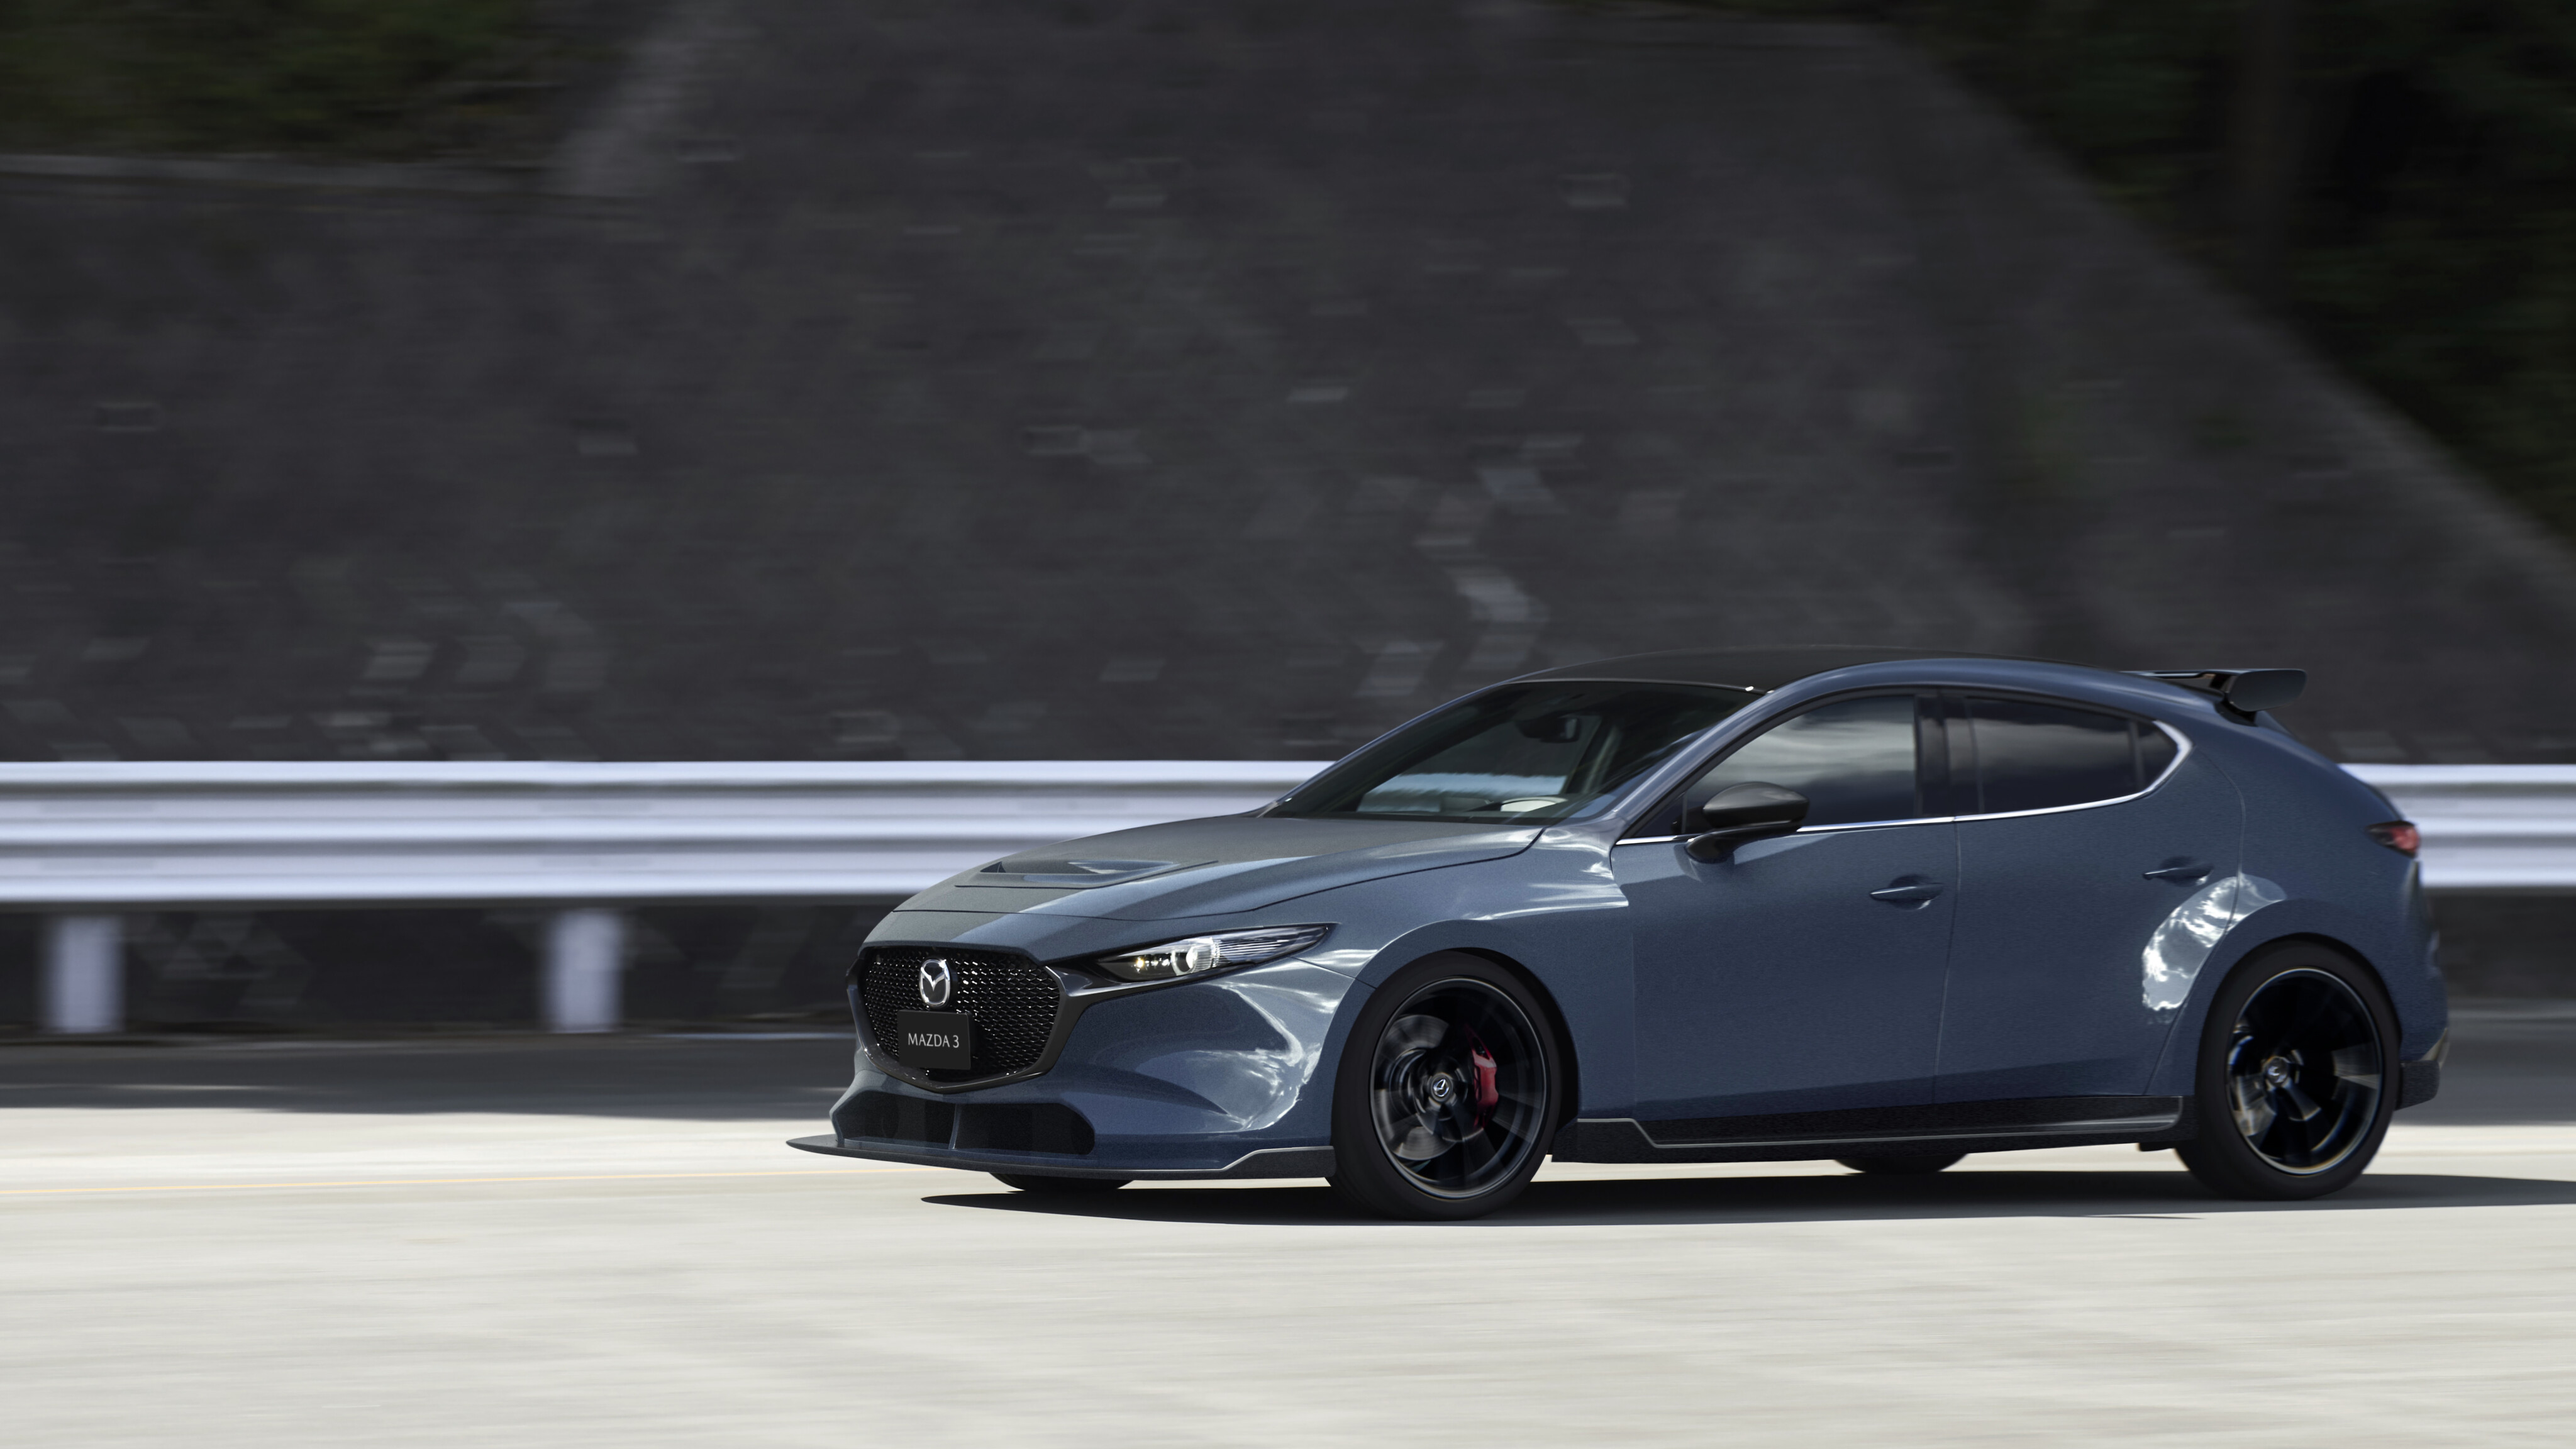 People asked for a Mazda 3 with more power: The 2021 Mazda 3 Turbo